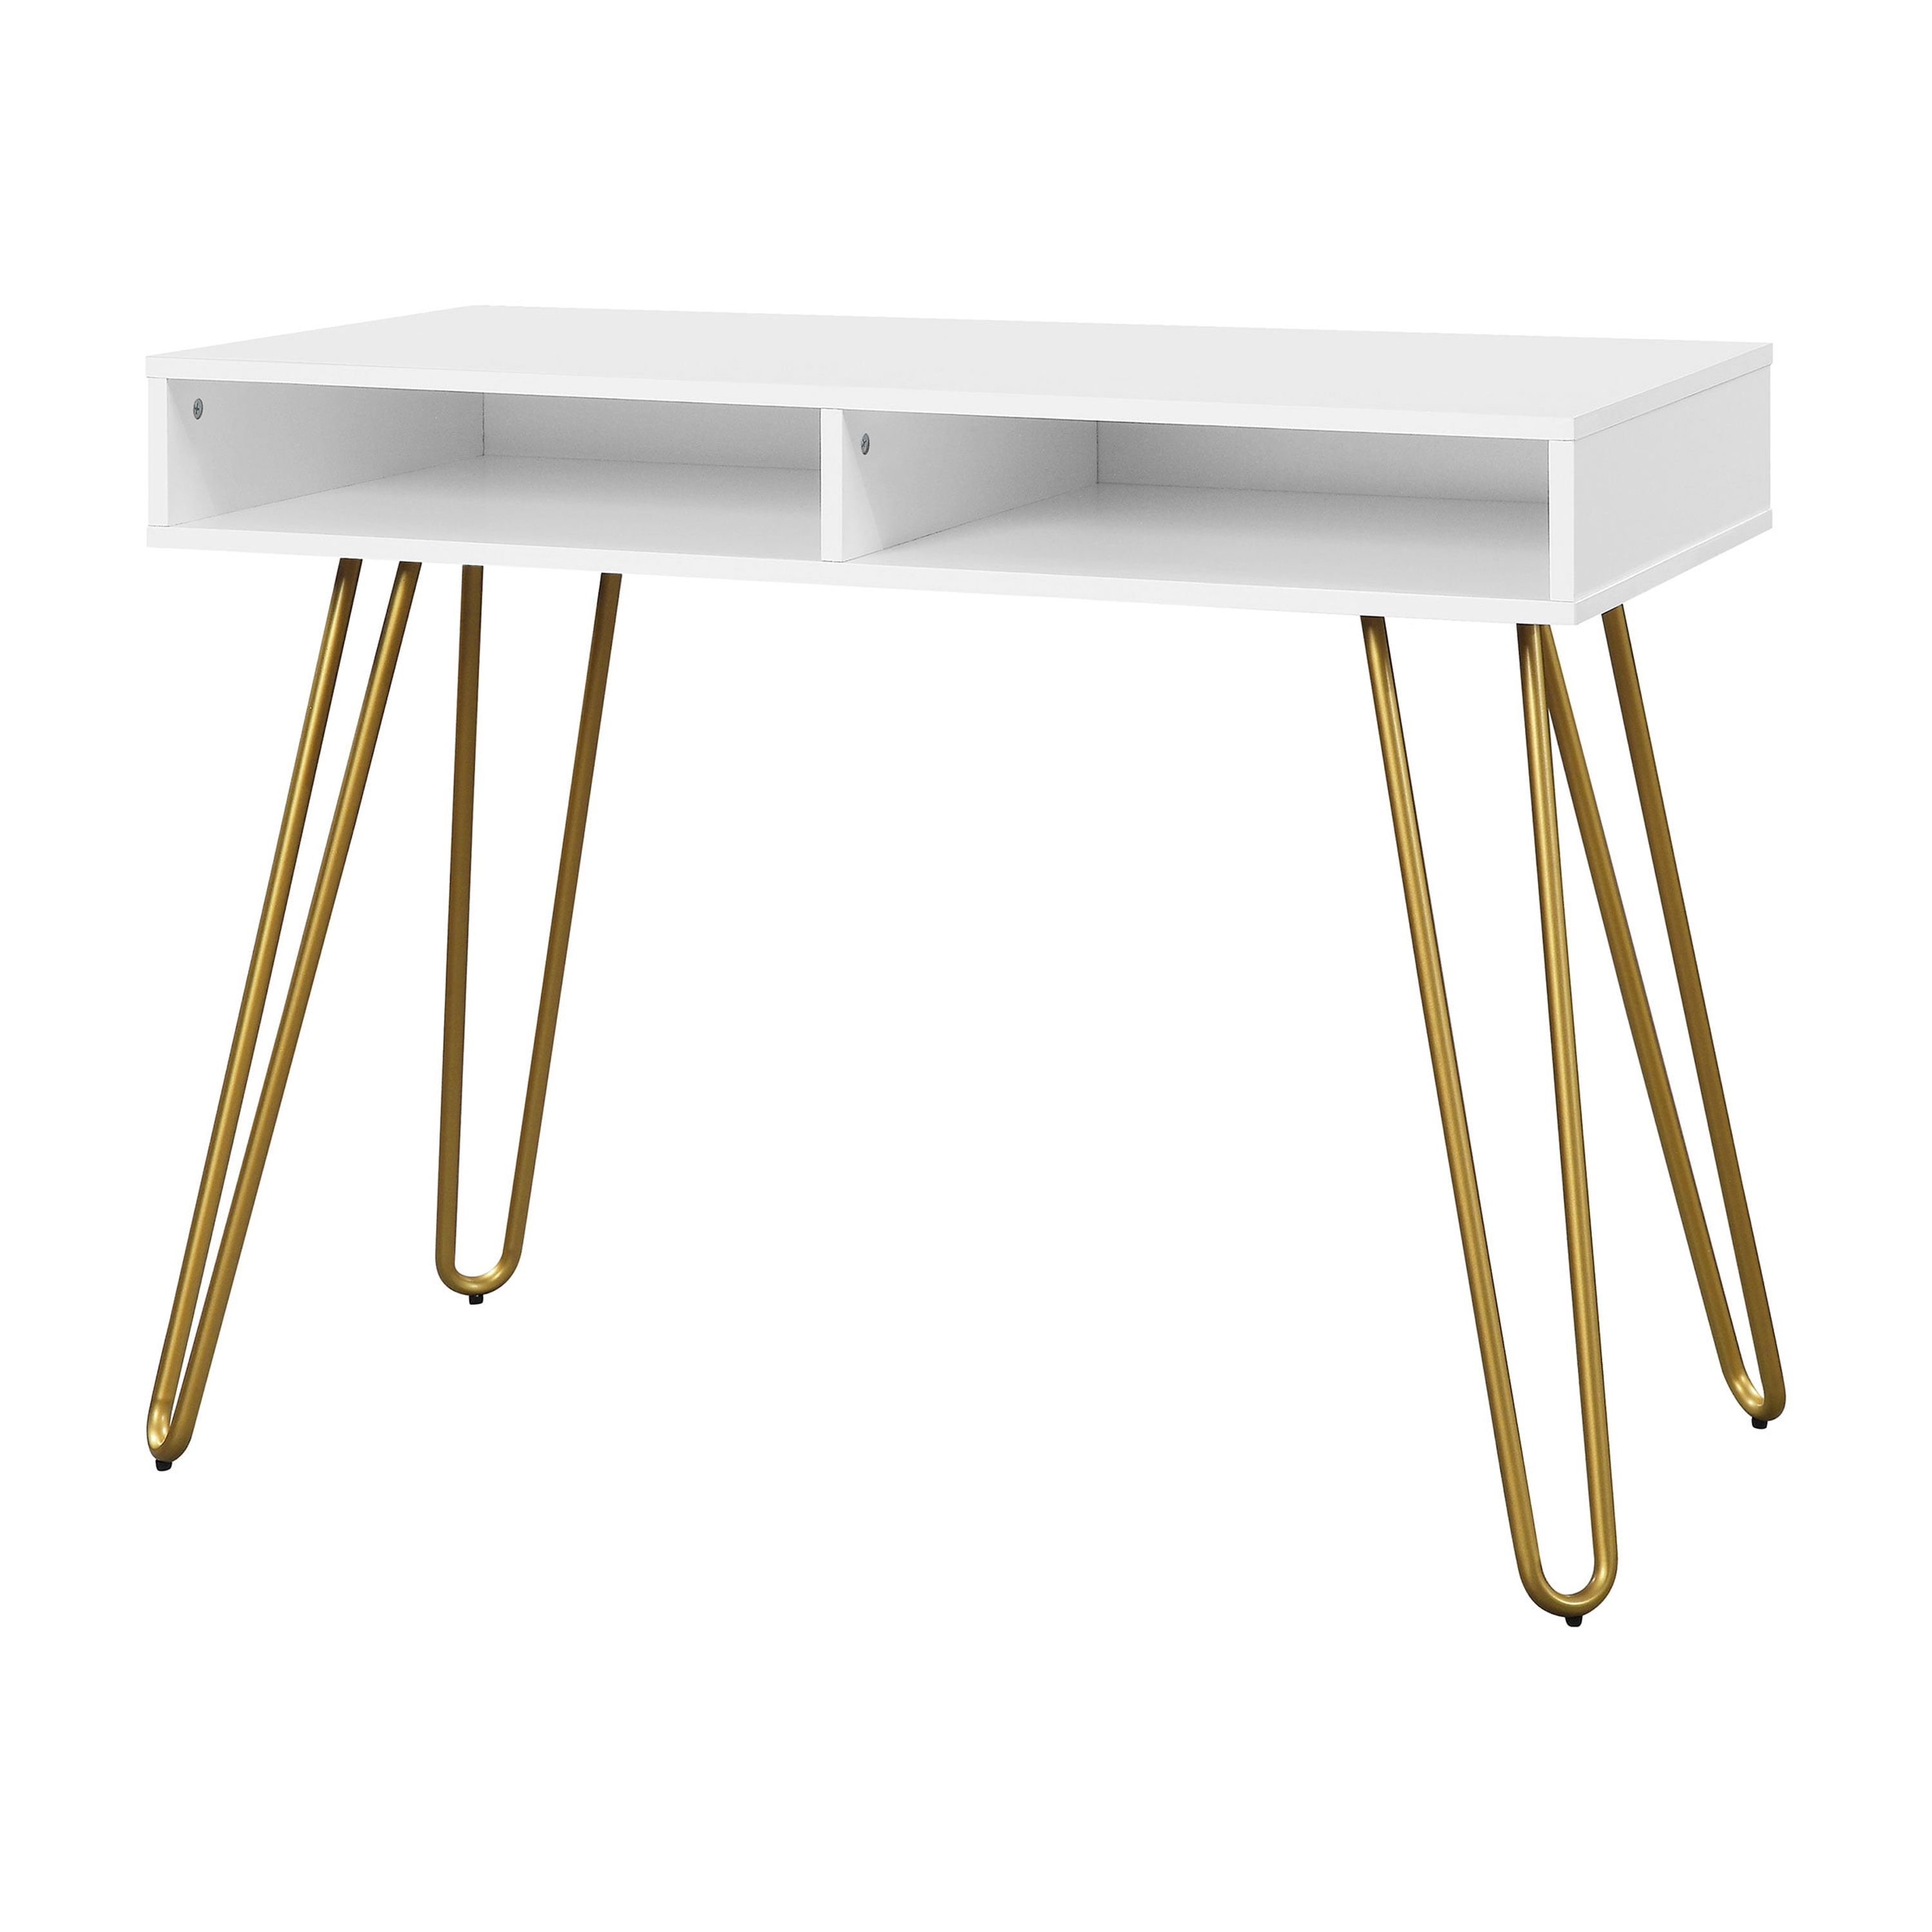 Mainstays Hairpin Writing Desk, Multiple Finishes - image 1 of 10